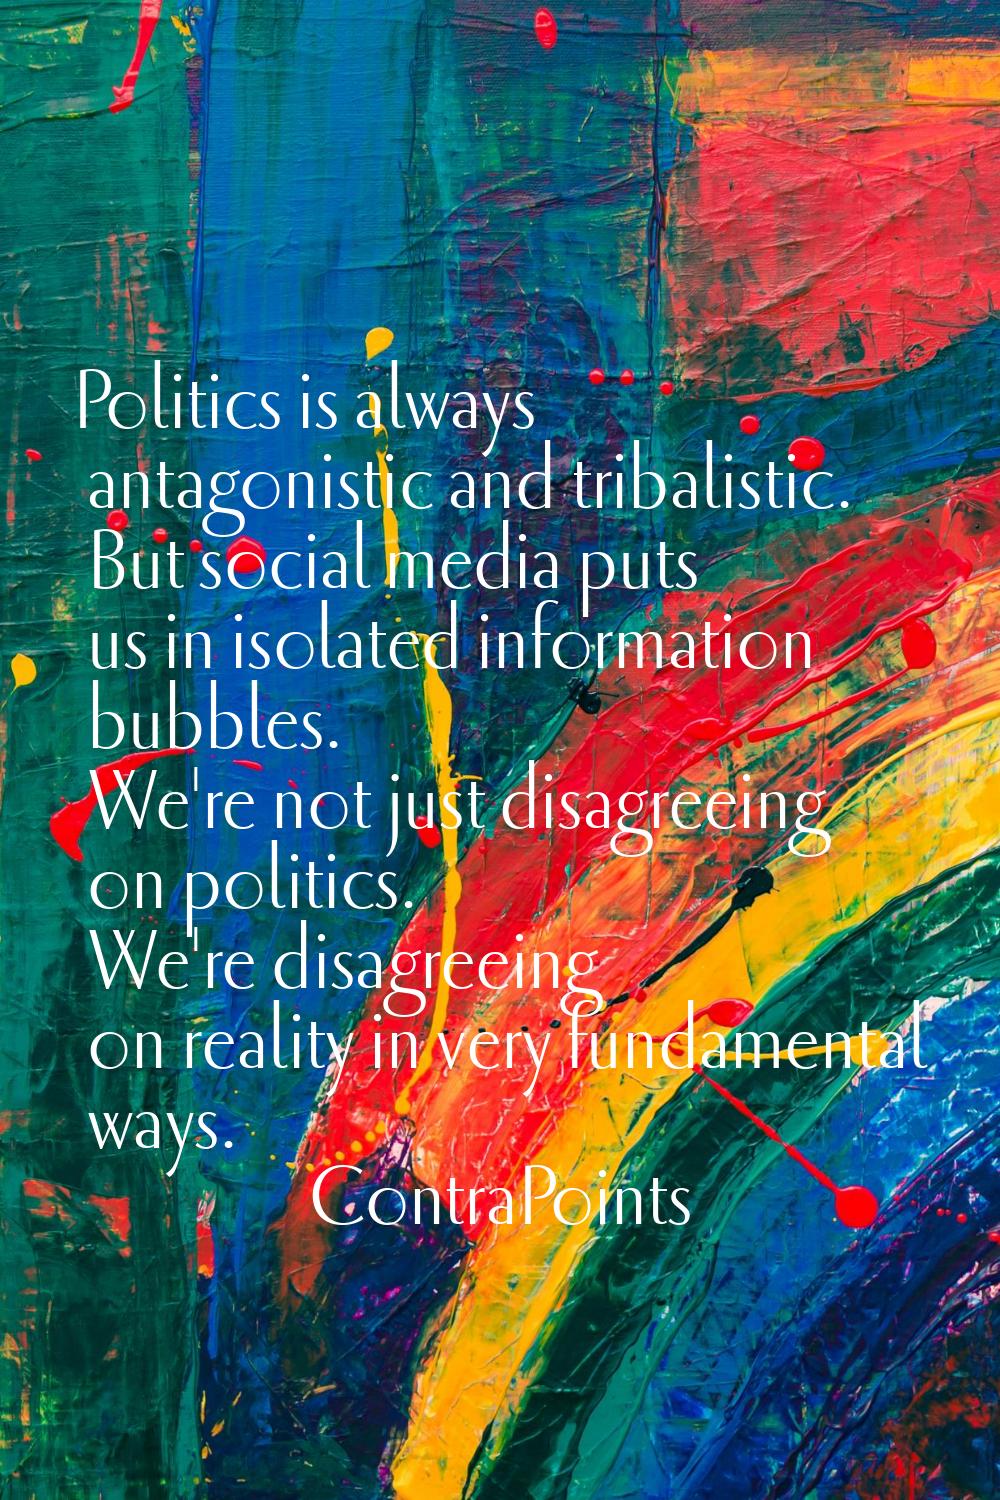 Politics is always antagonistic and tribalistic. But social media puts us in isolated information b